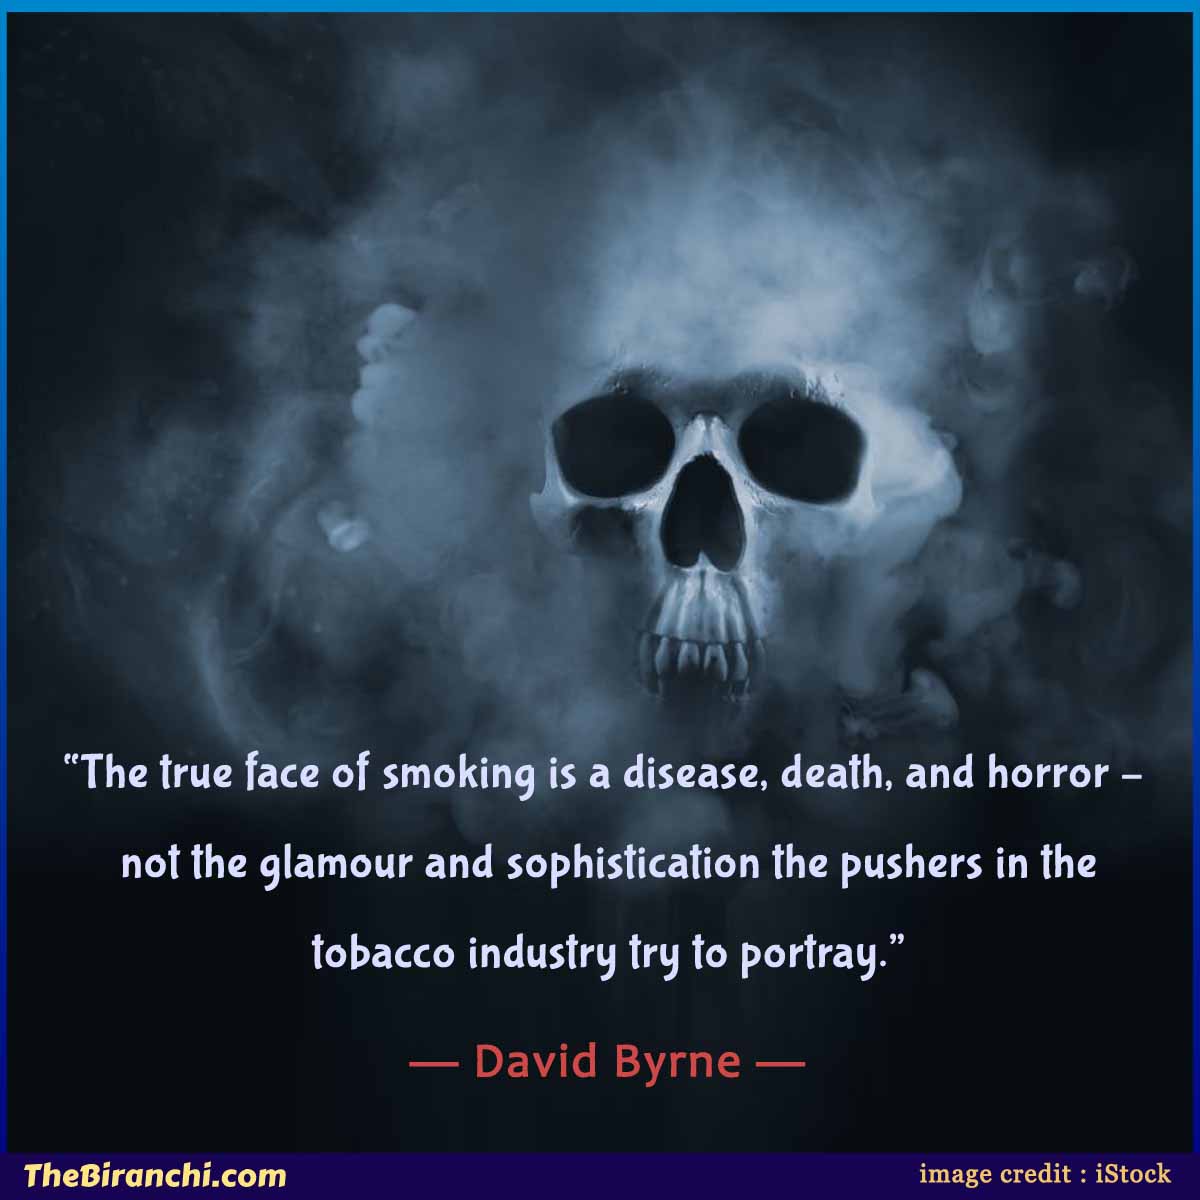 smoking-is-a-disease-death-and-horror-not-the-glamour-and-sophistication-the-pushers-in-the-tobacco-industry-try-to-portray-David-Byrne-anti-smoking-awareness-quotes-1